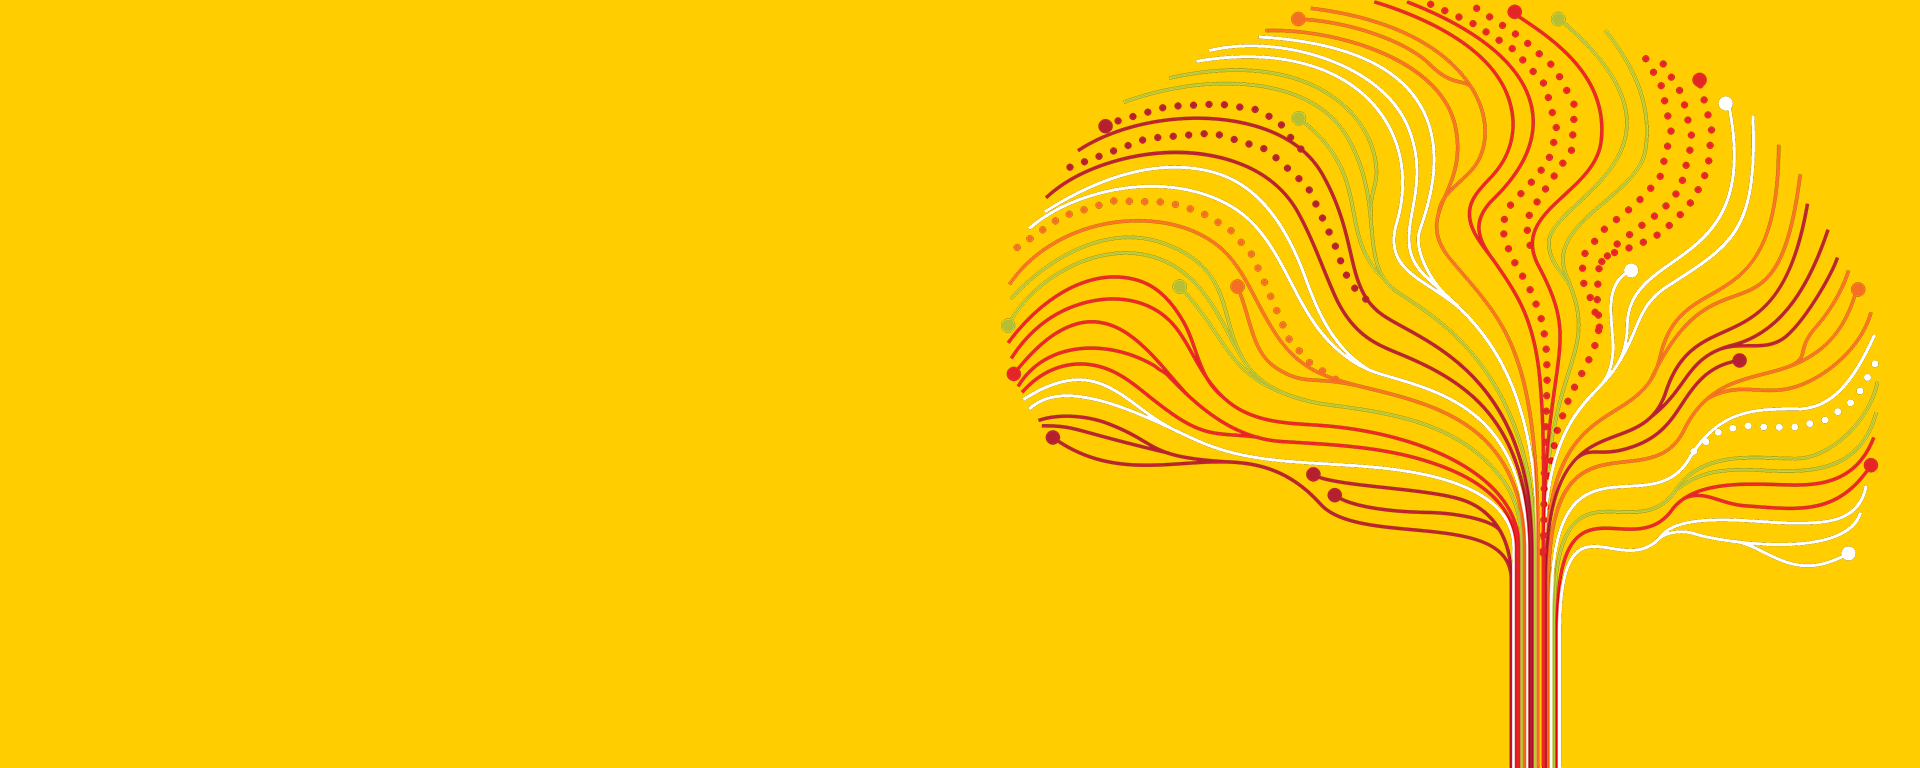 Yellow background with outline of a brain-shaped tree